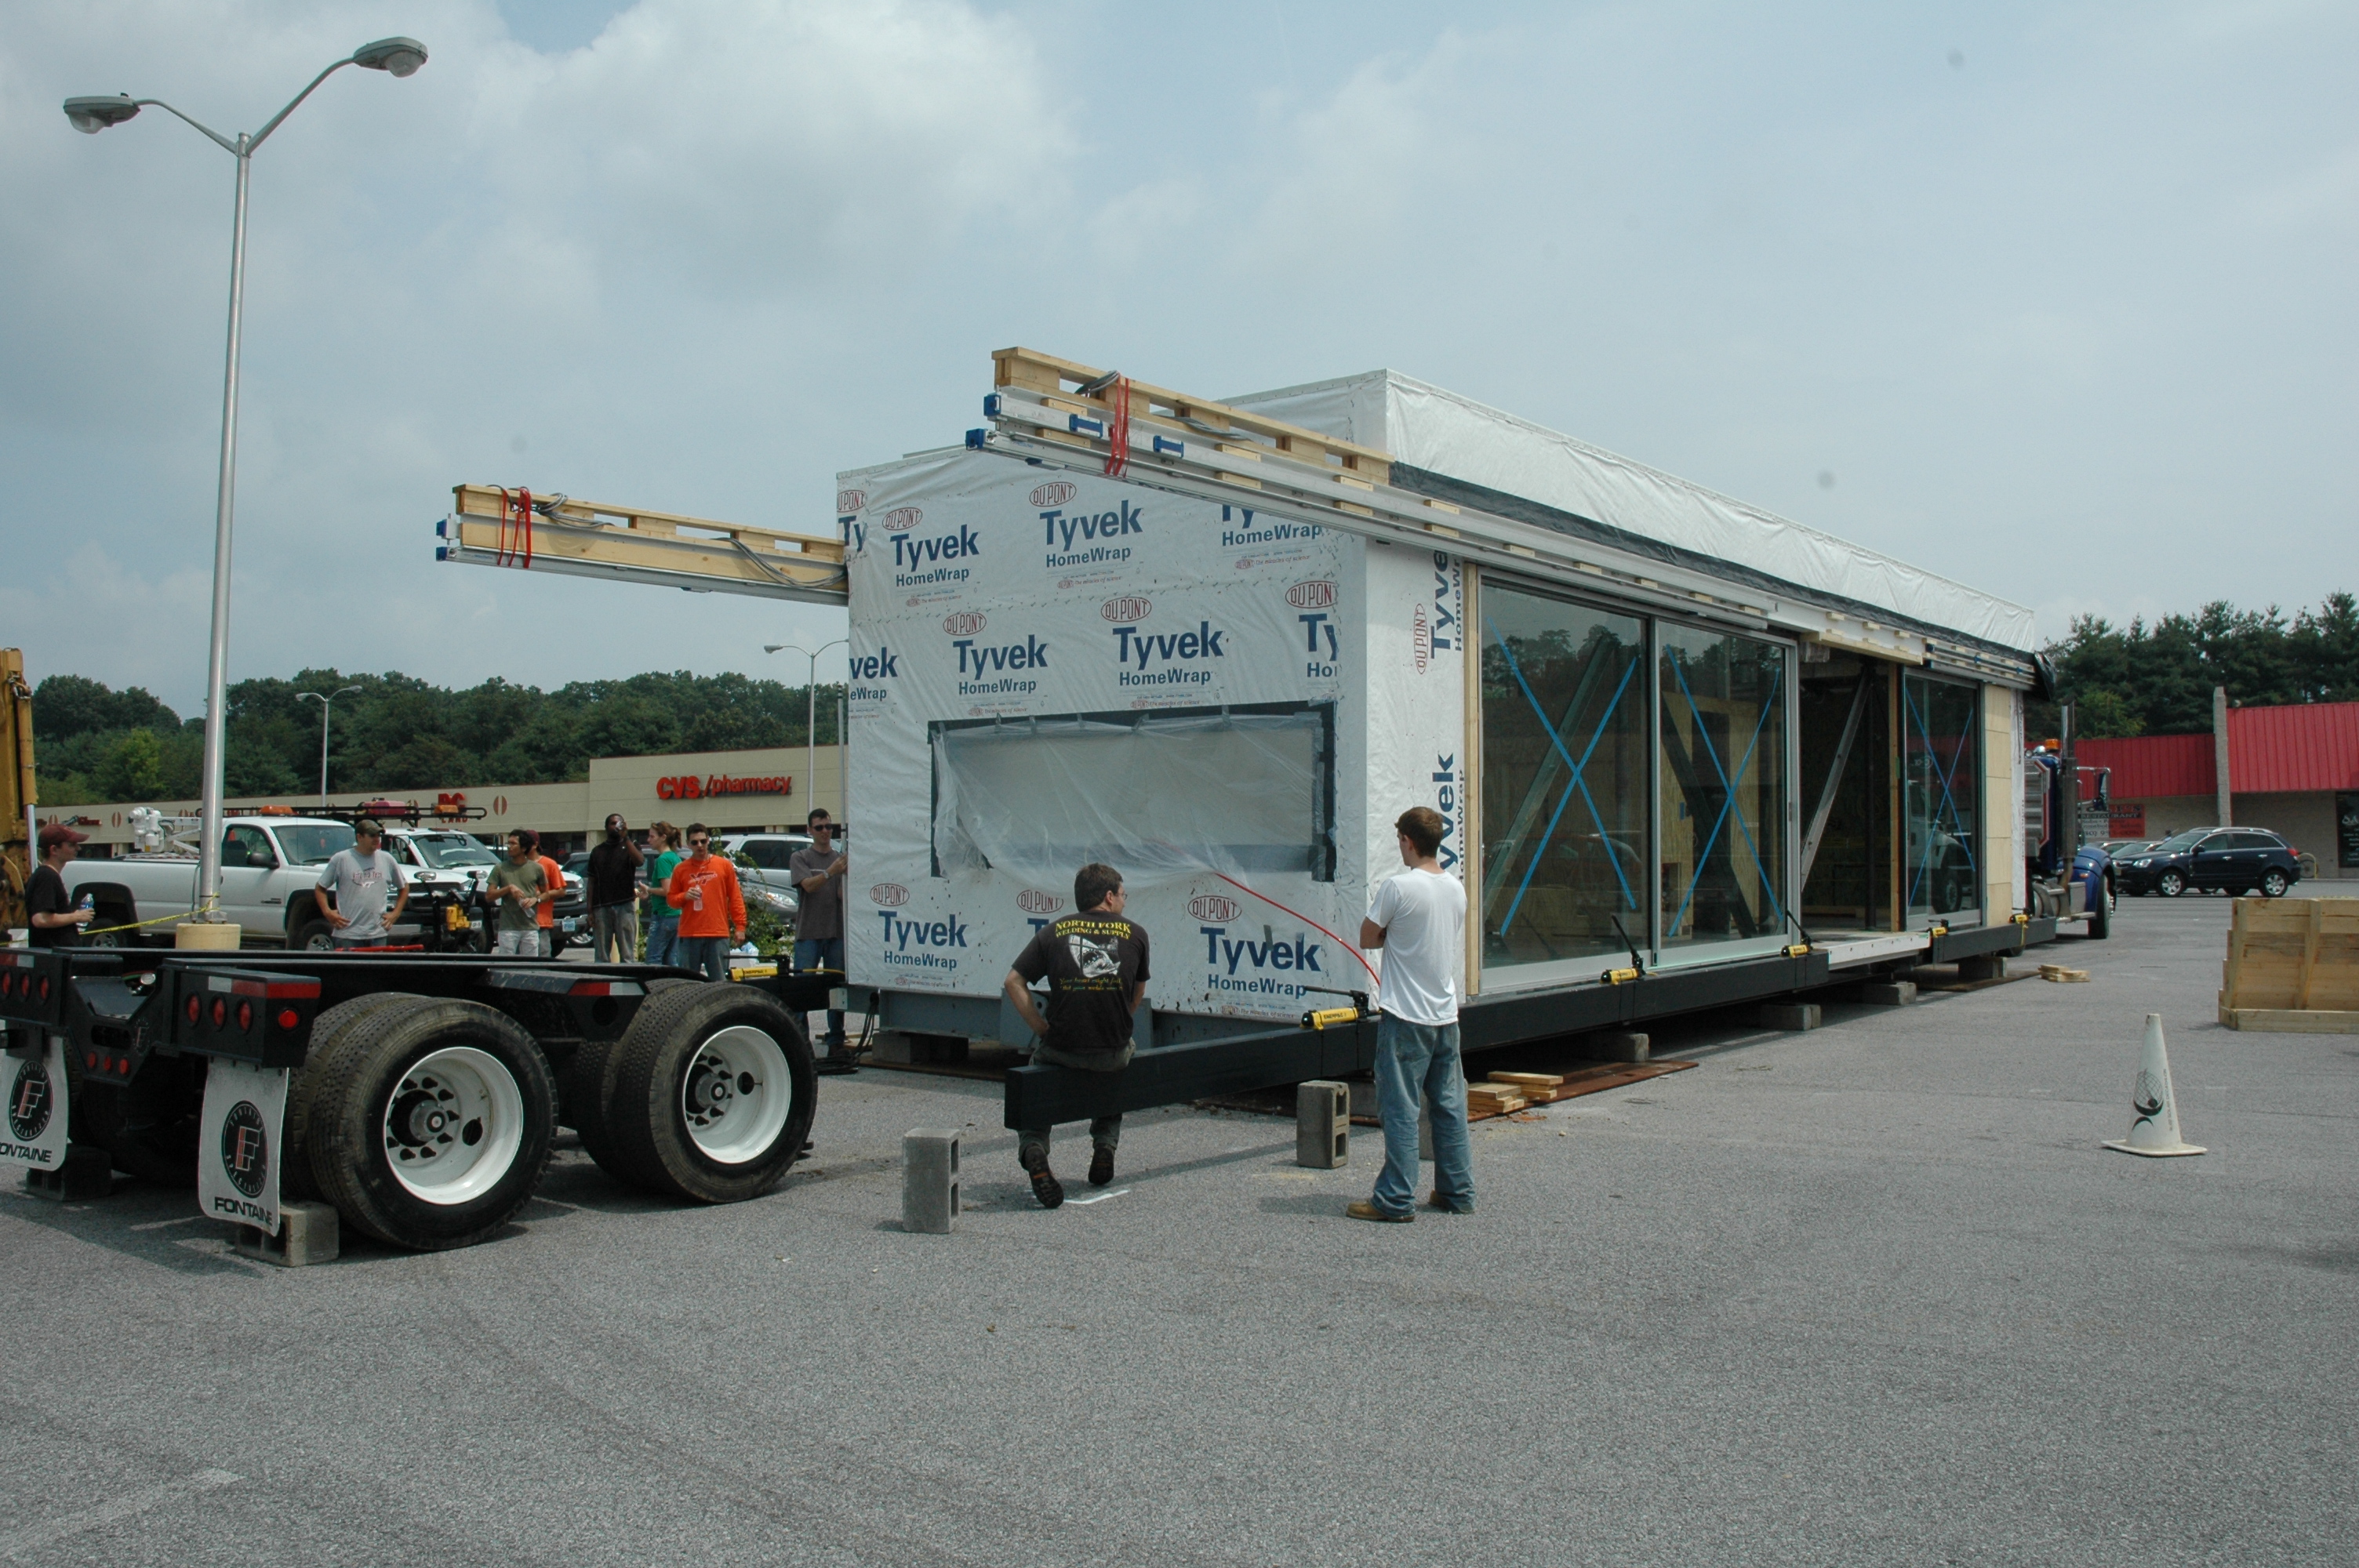 The Virginia Tech solar house was moved to Blacksburg Square shopping center on Aug. 9 so the team could plug into the town's grid to test the house's systems and raise awareness of the Solar Decathlon competition.